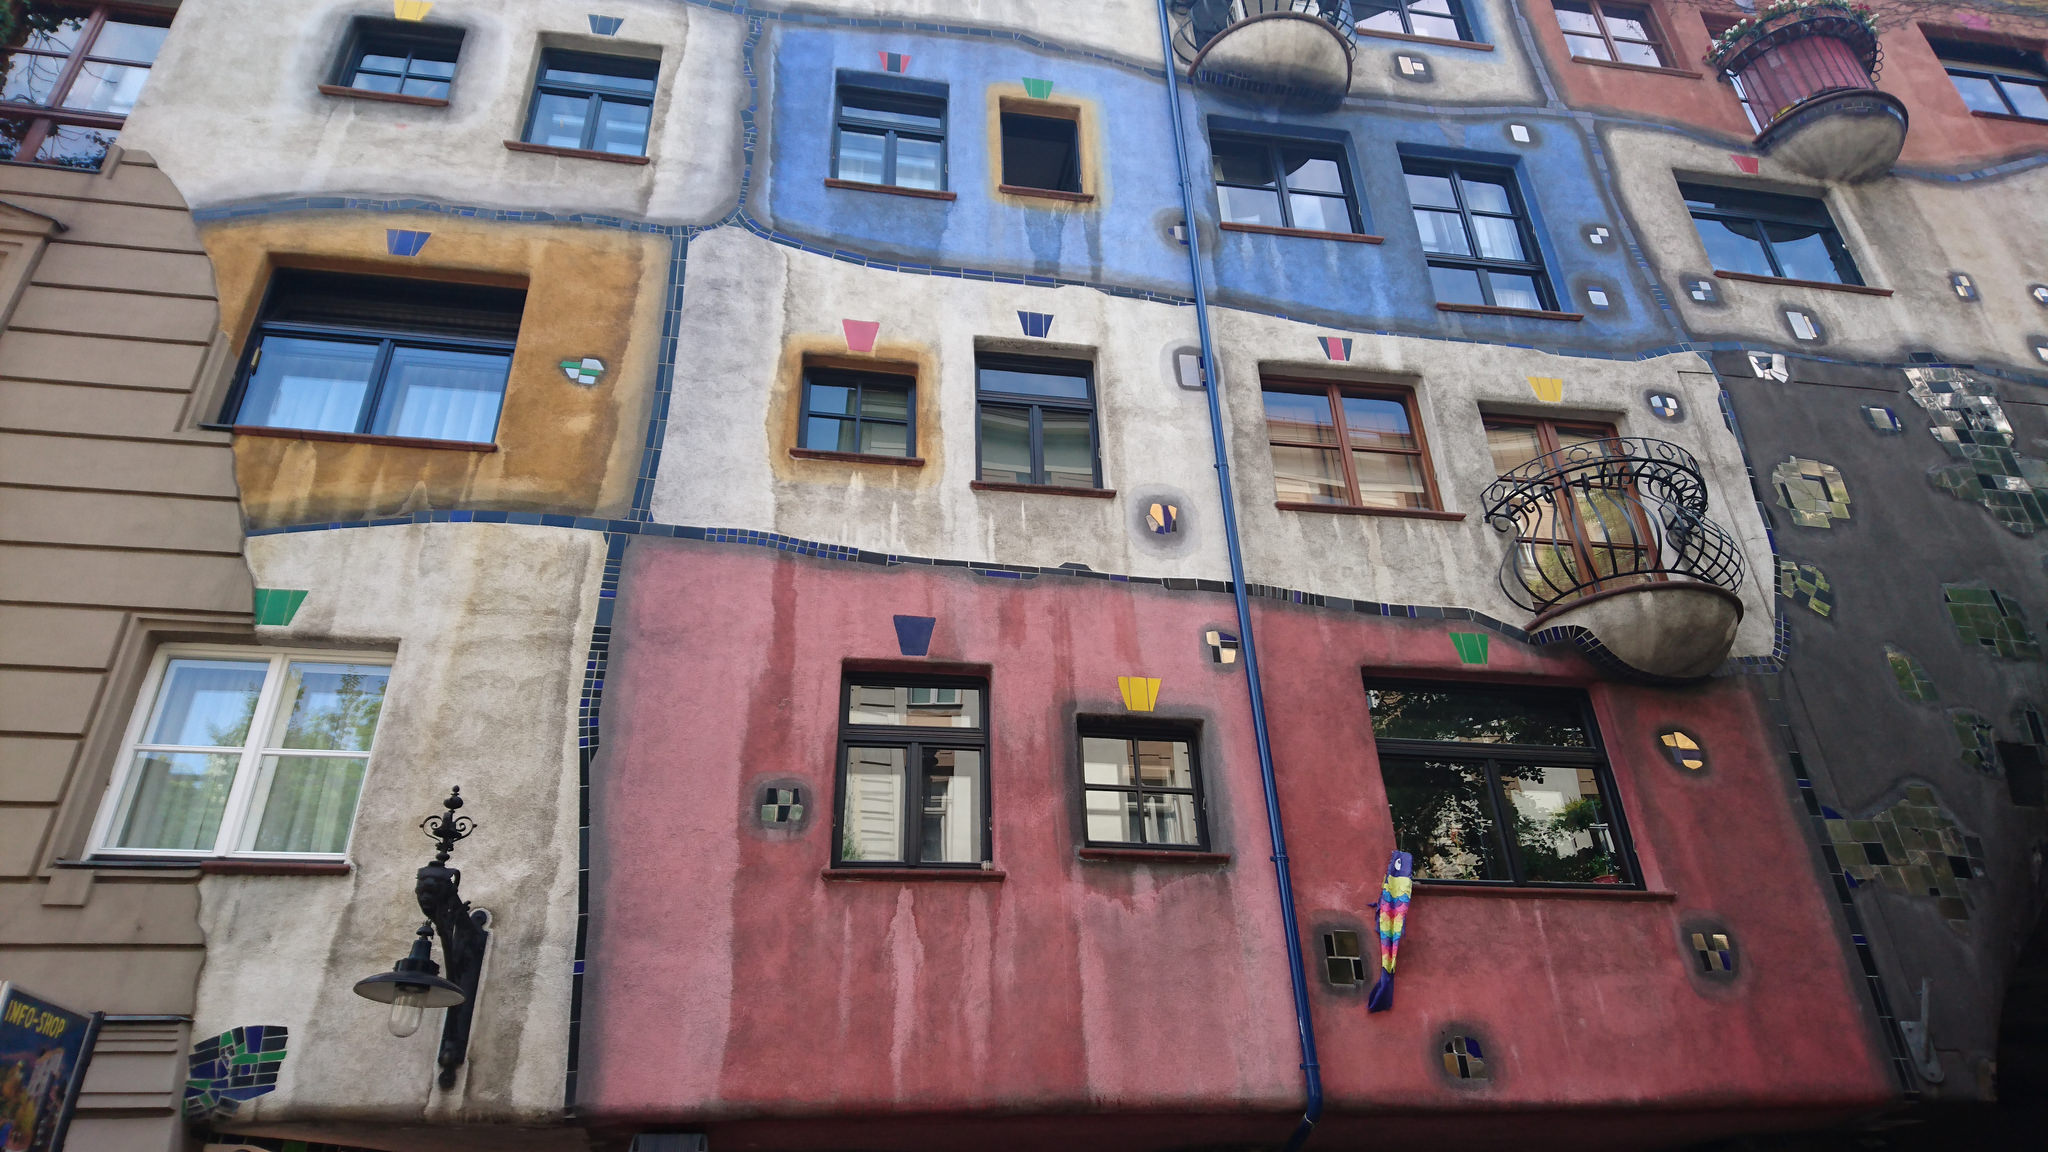 Here is another of Friedensreich Hundertwasser's famous buildings. Wouldn't you love to live here? 